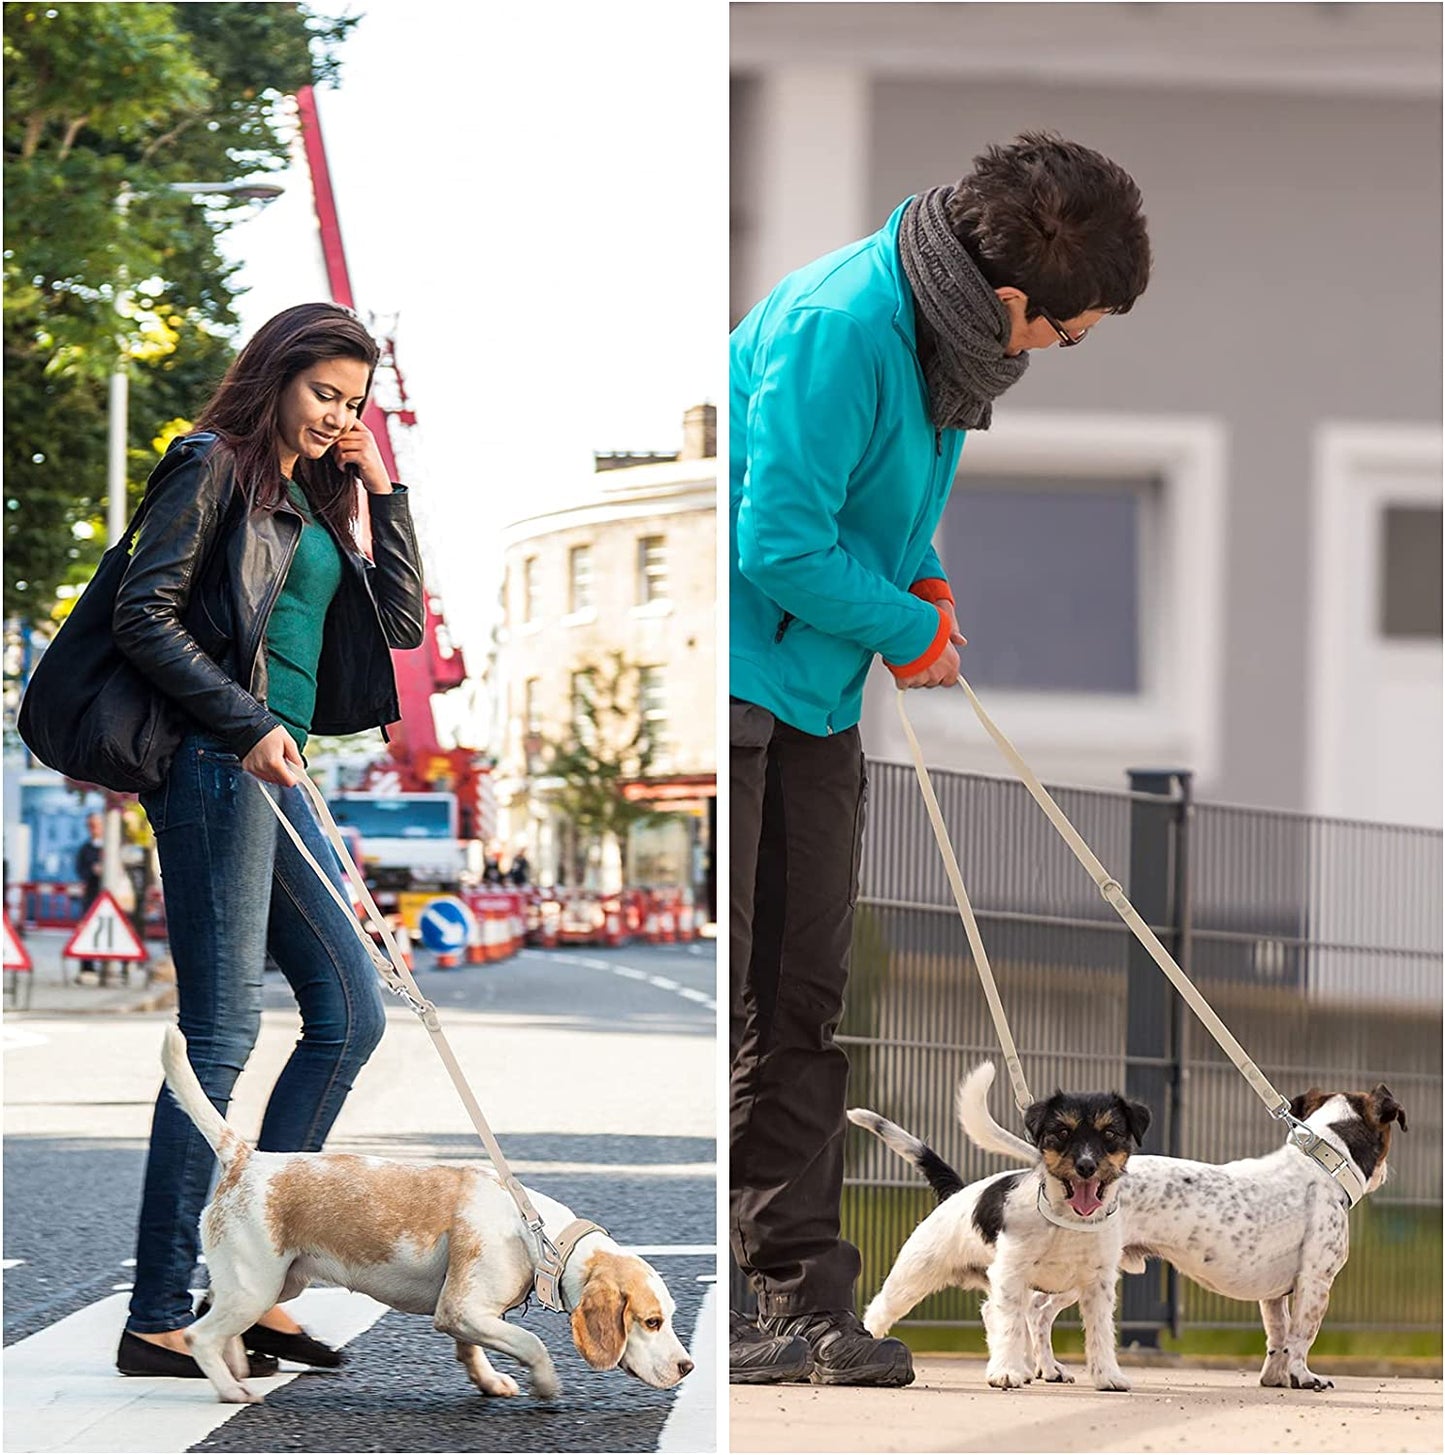 Dog Leash from Durable Waterproof Material with 2 Hooks and Adjustable Length - Sand